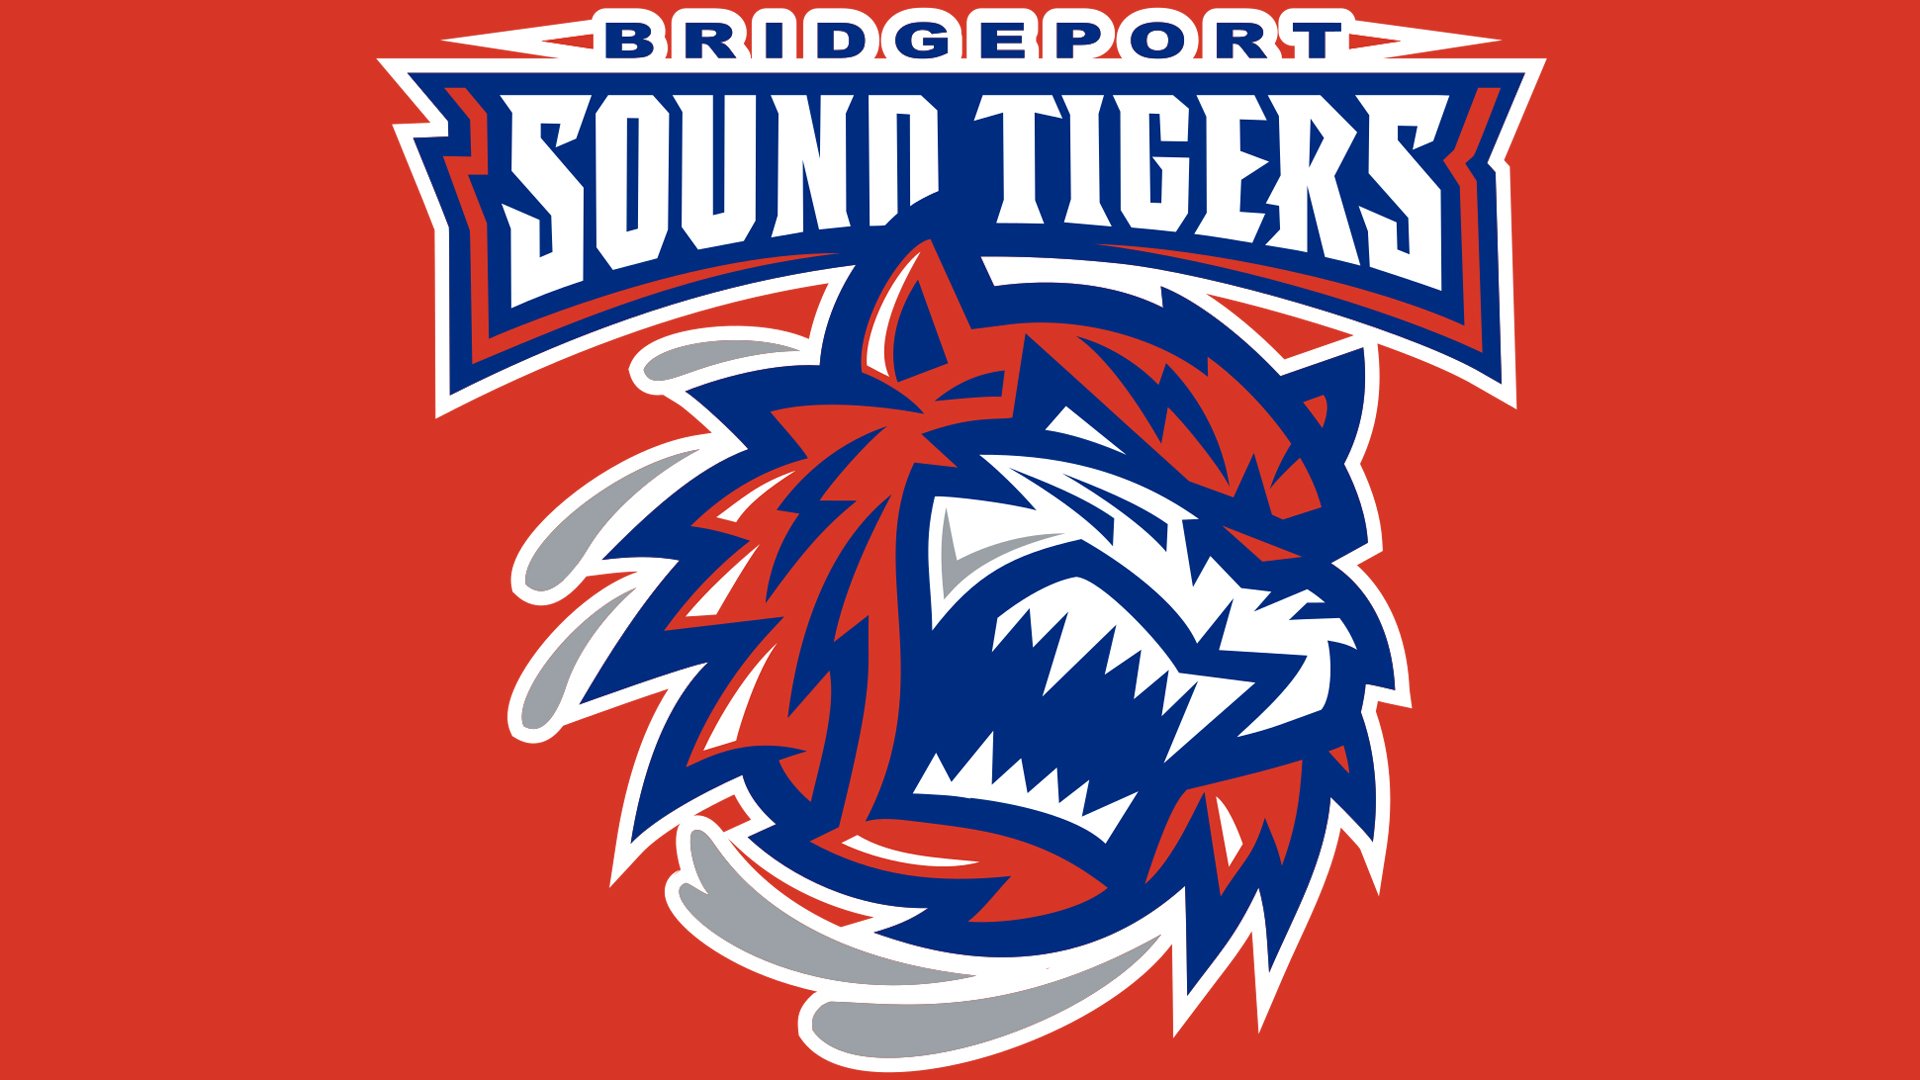 Meaning Bridgeport Sound Tigers logo and symbol | history and evolution1920 x 1080